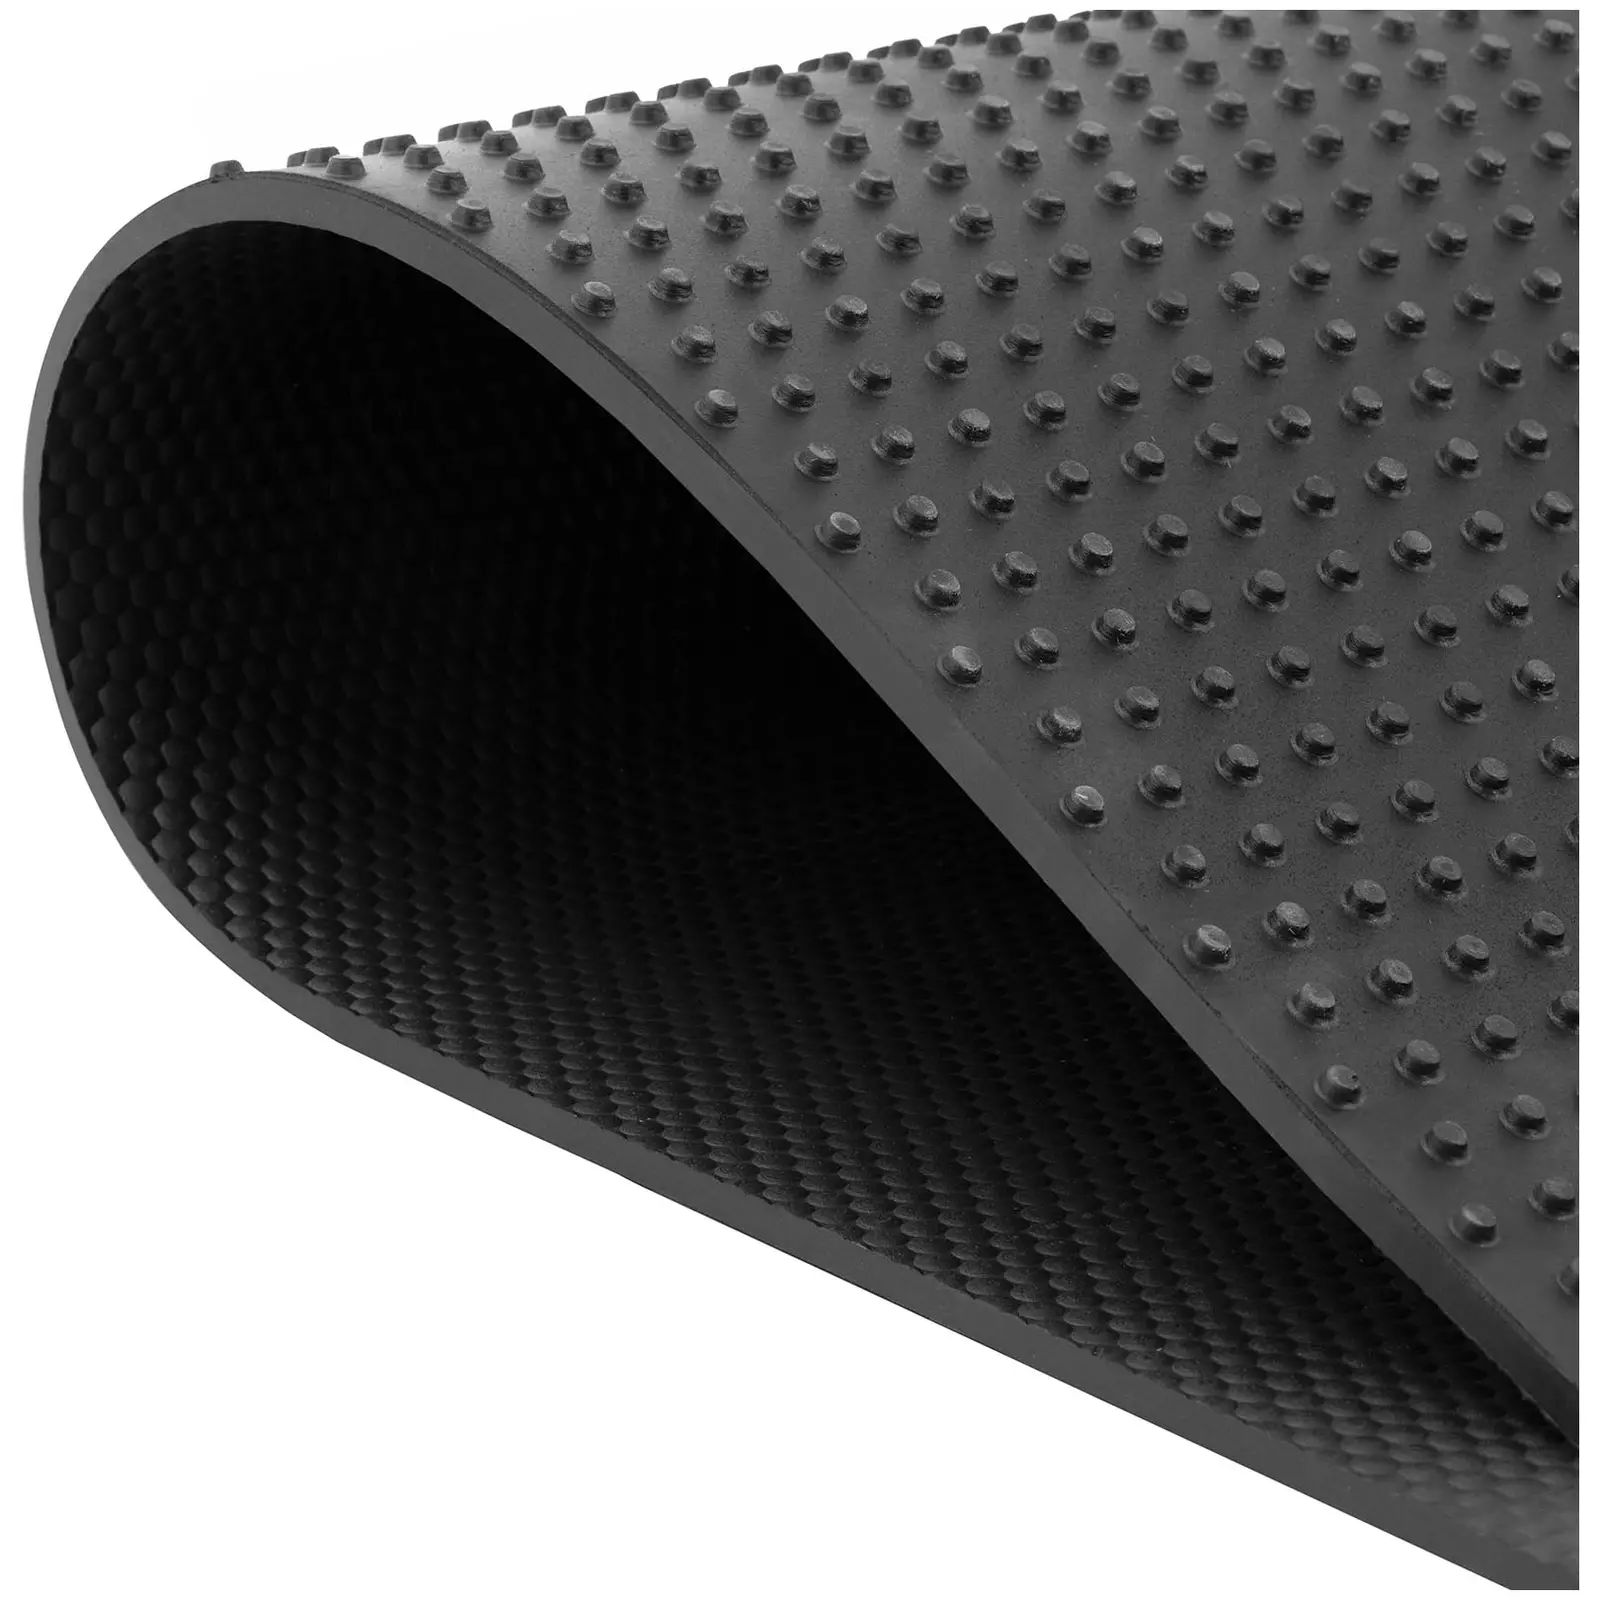 Stable Mats - set of 5 - with drainage studs - 1830 x 1220   mm - 11.15 m²